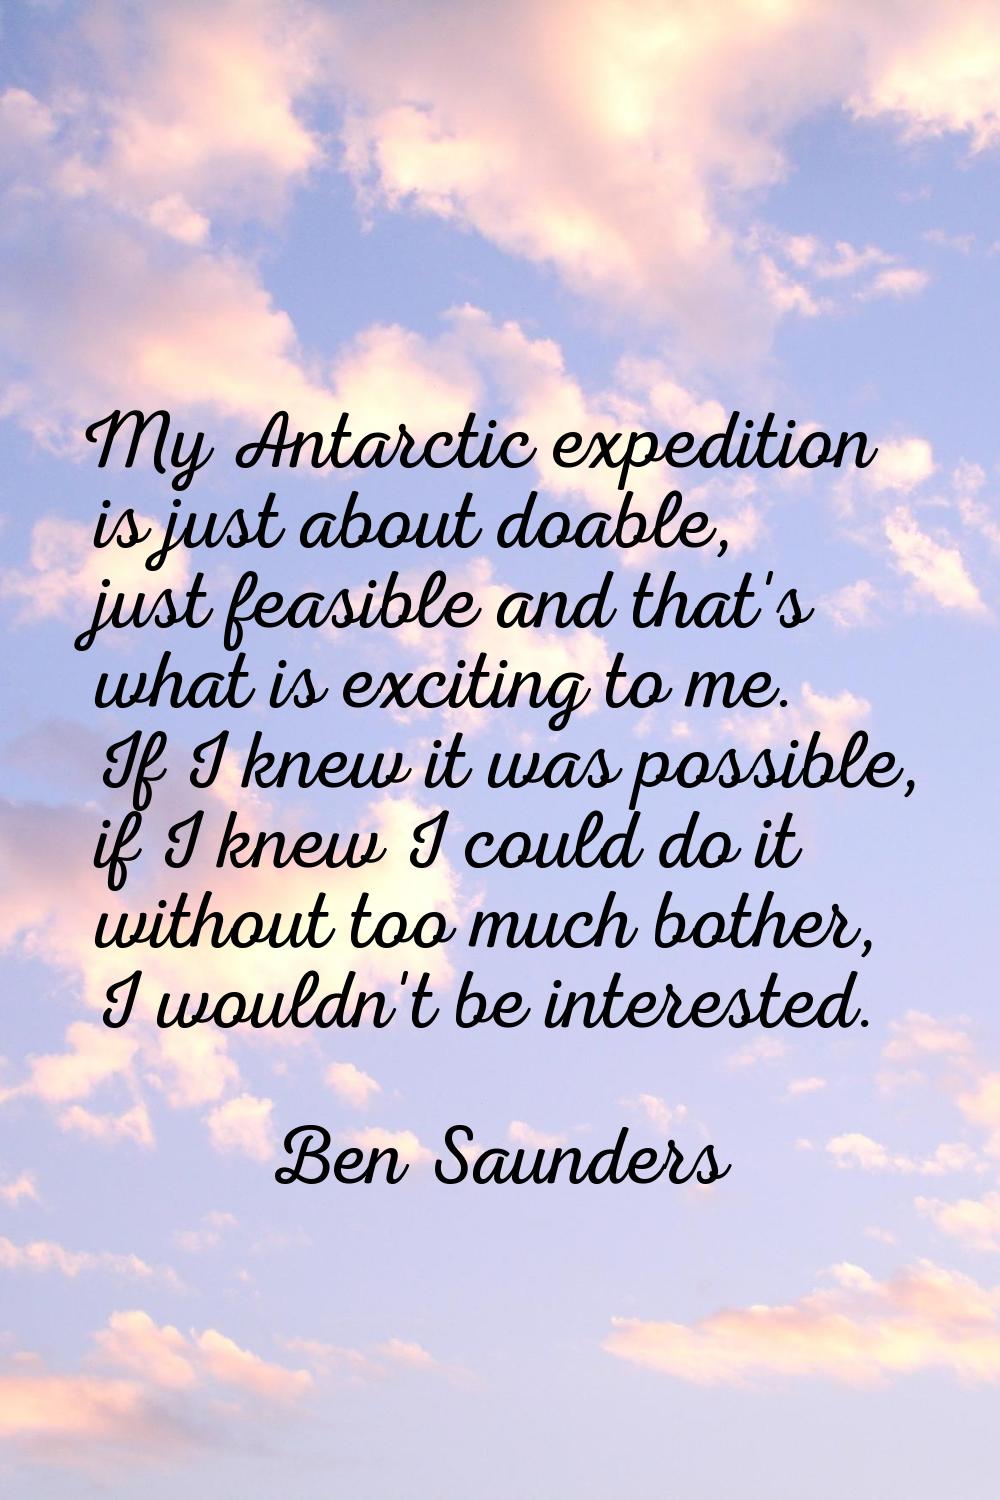 My Antarctic expedition is just about doable, just feasible and that's what is exciting to me. If I